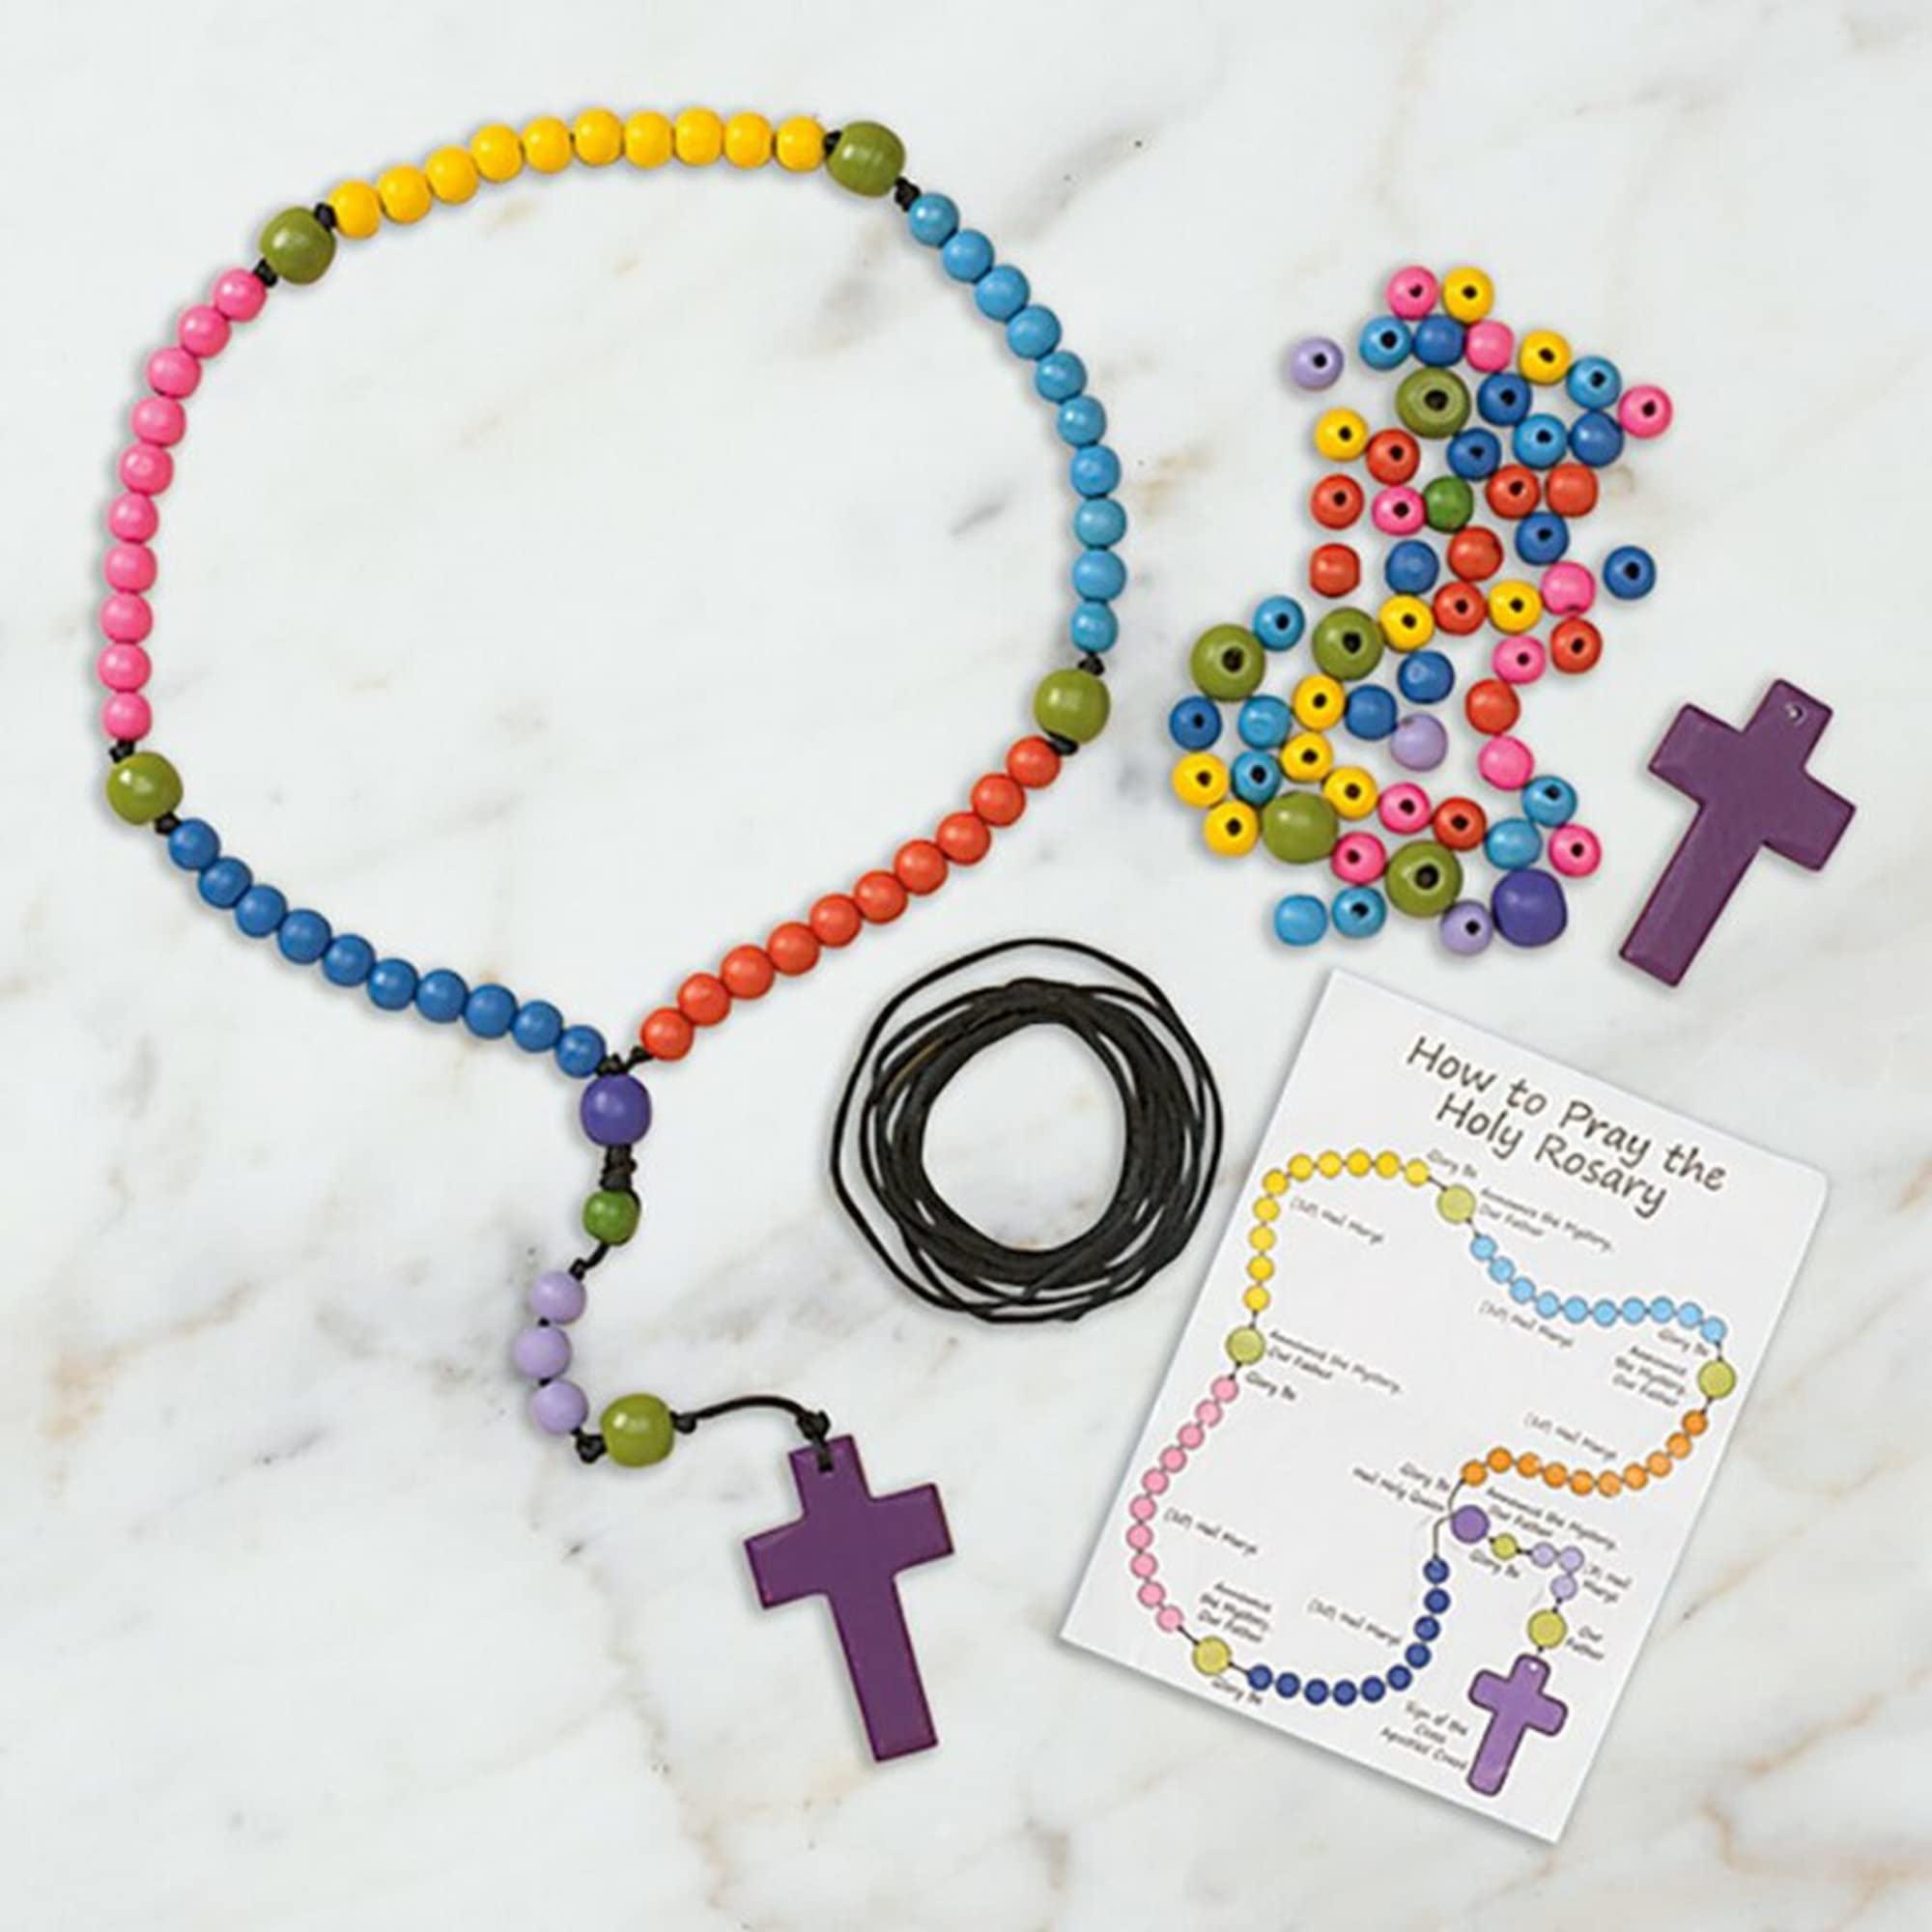 Ddi Make-Your-Own Beaded Rosary Craft Kit - image 2 of 4